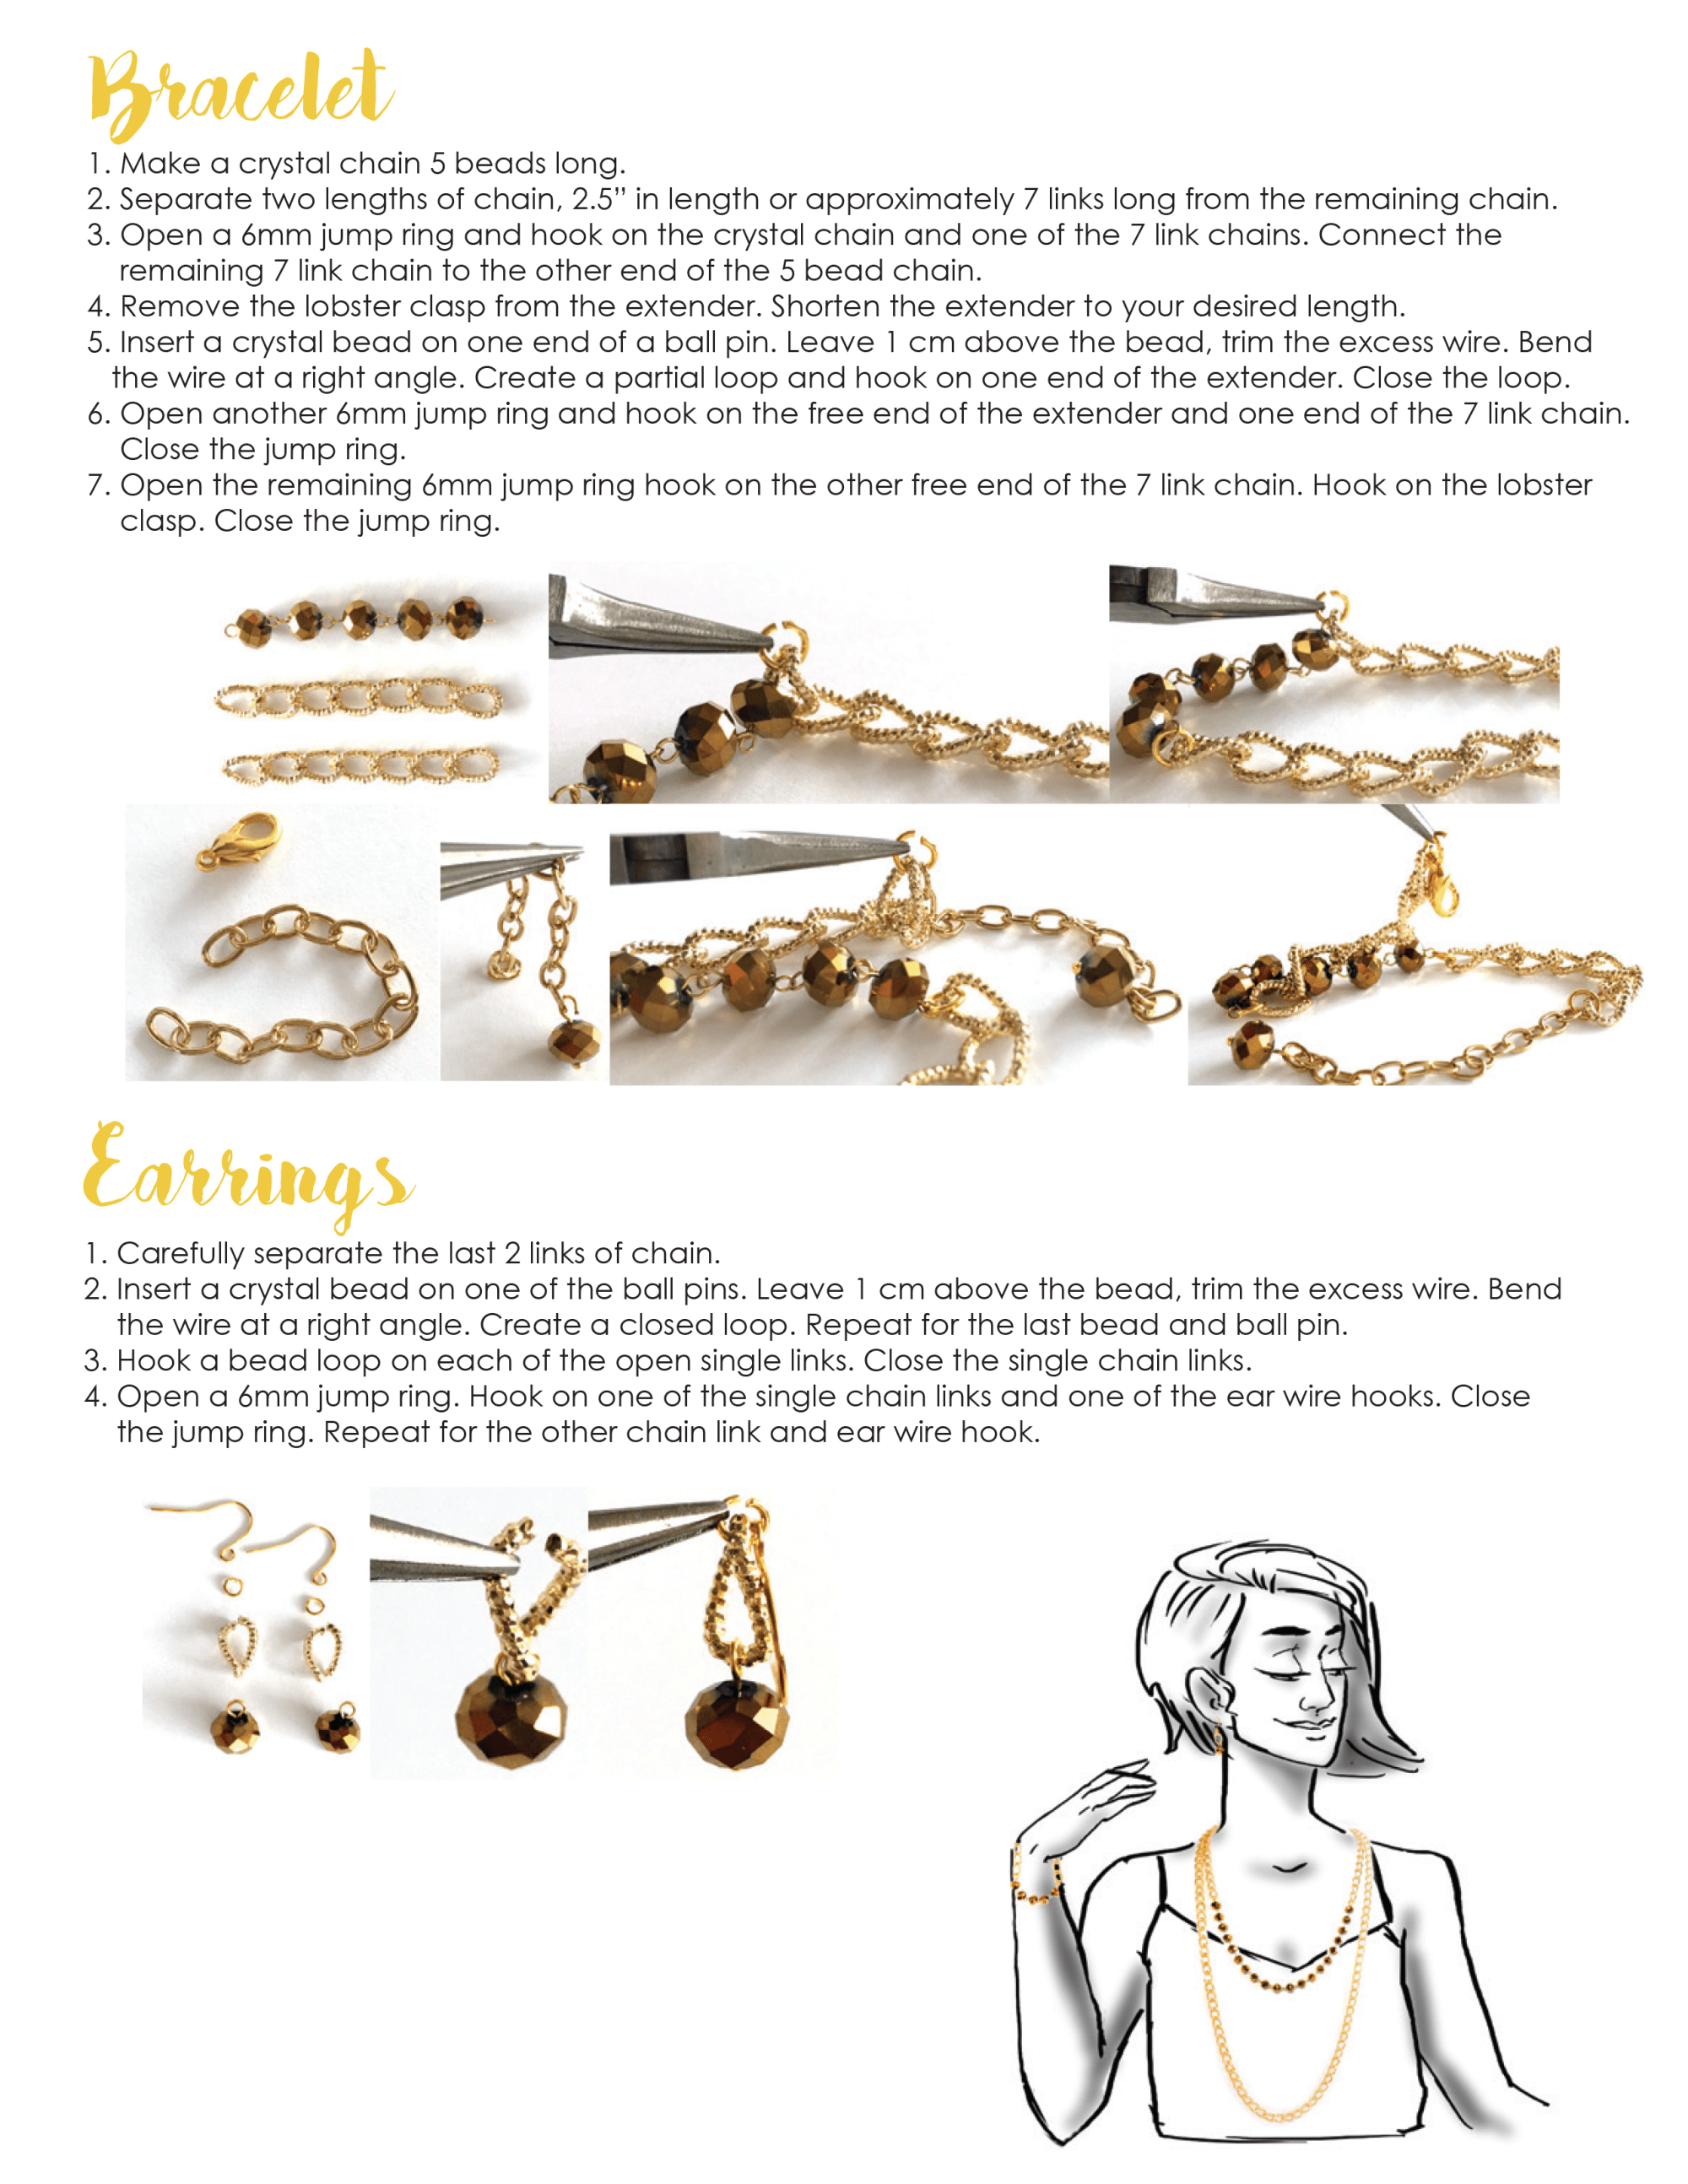 Steps to create a crystal & chain bracklet and earrings